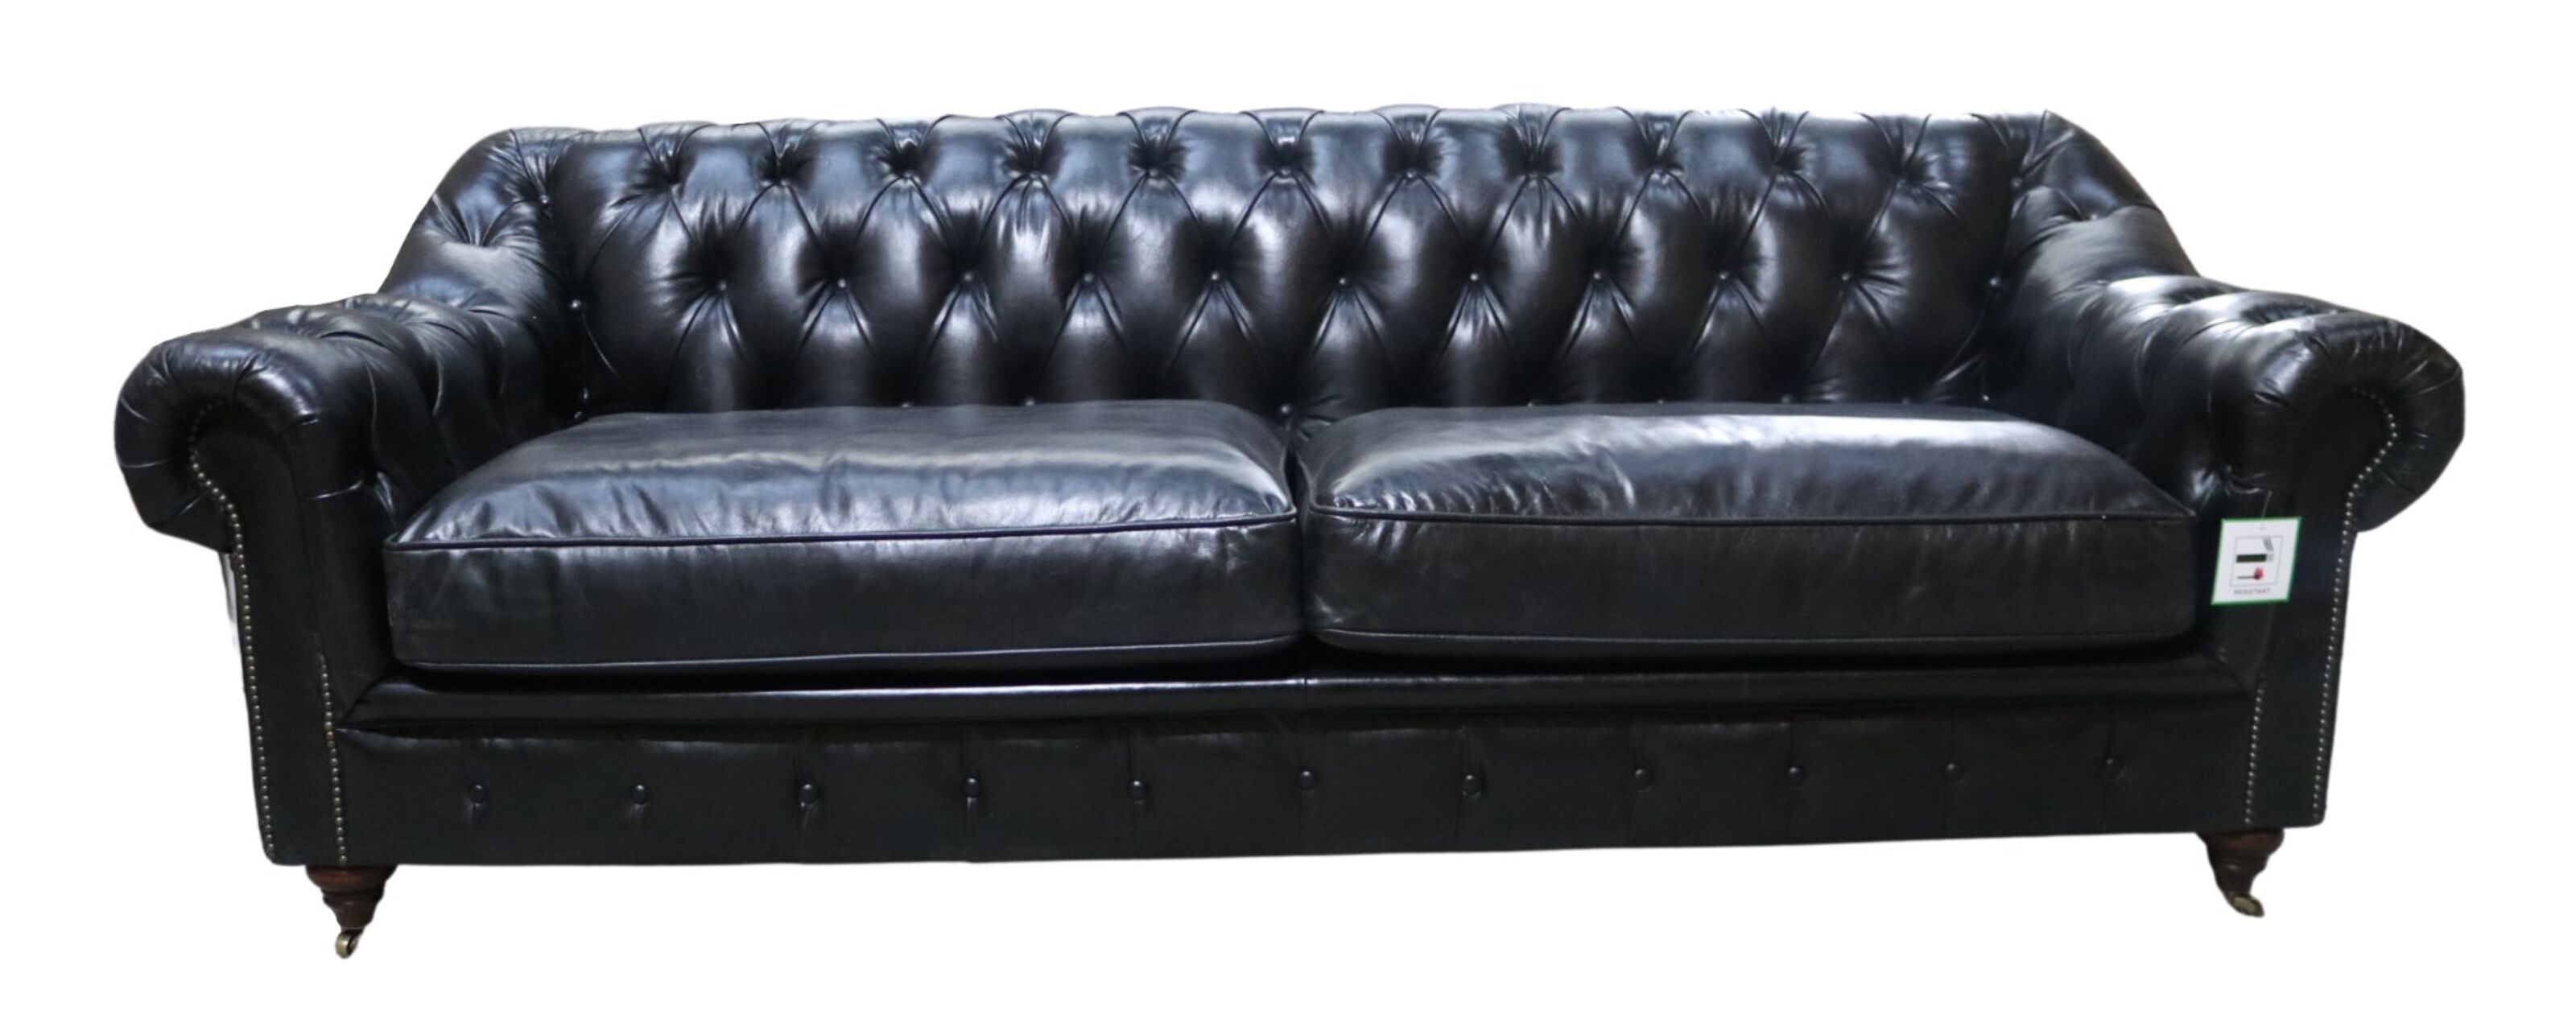 Timeless Chesterfield Sofas by John Lewis  %Post Title